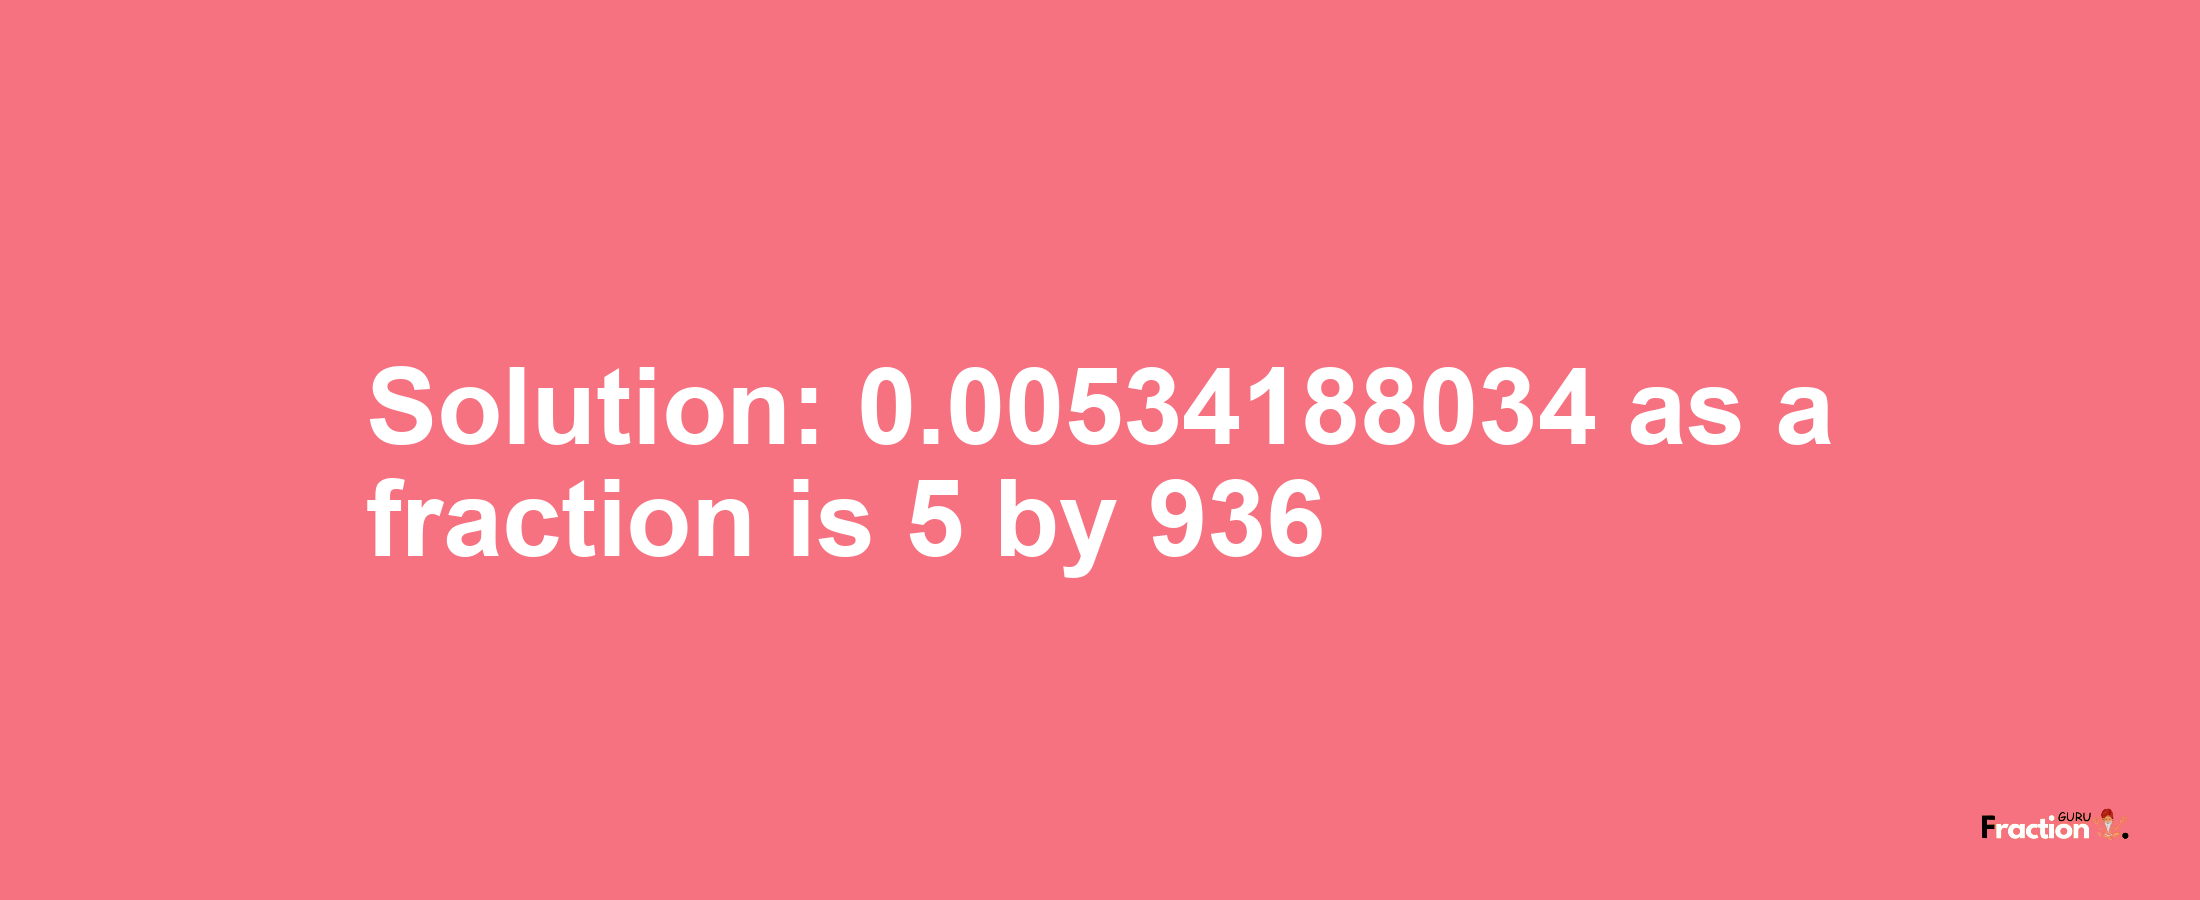 Solution:0.00534188034 as a fraction is 5/936